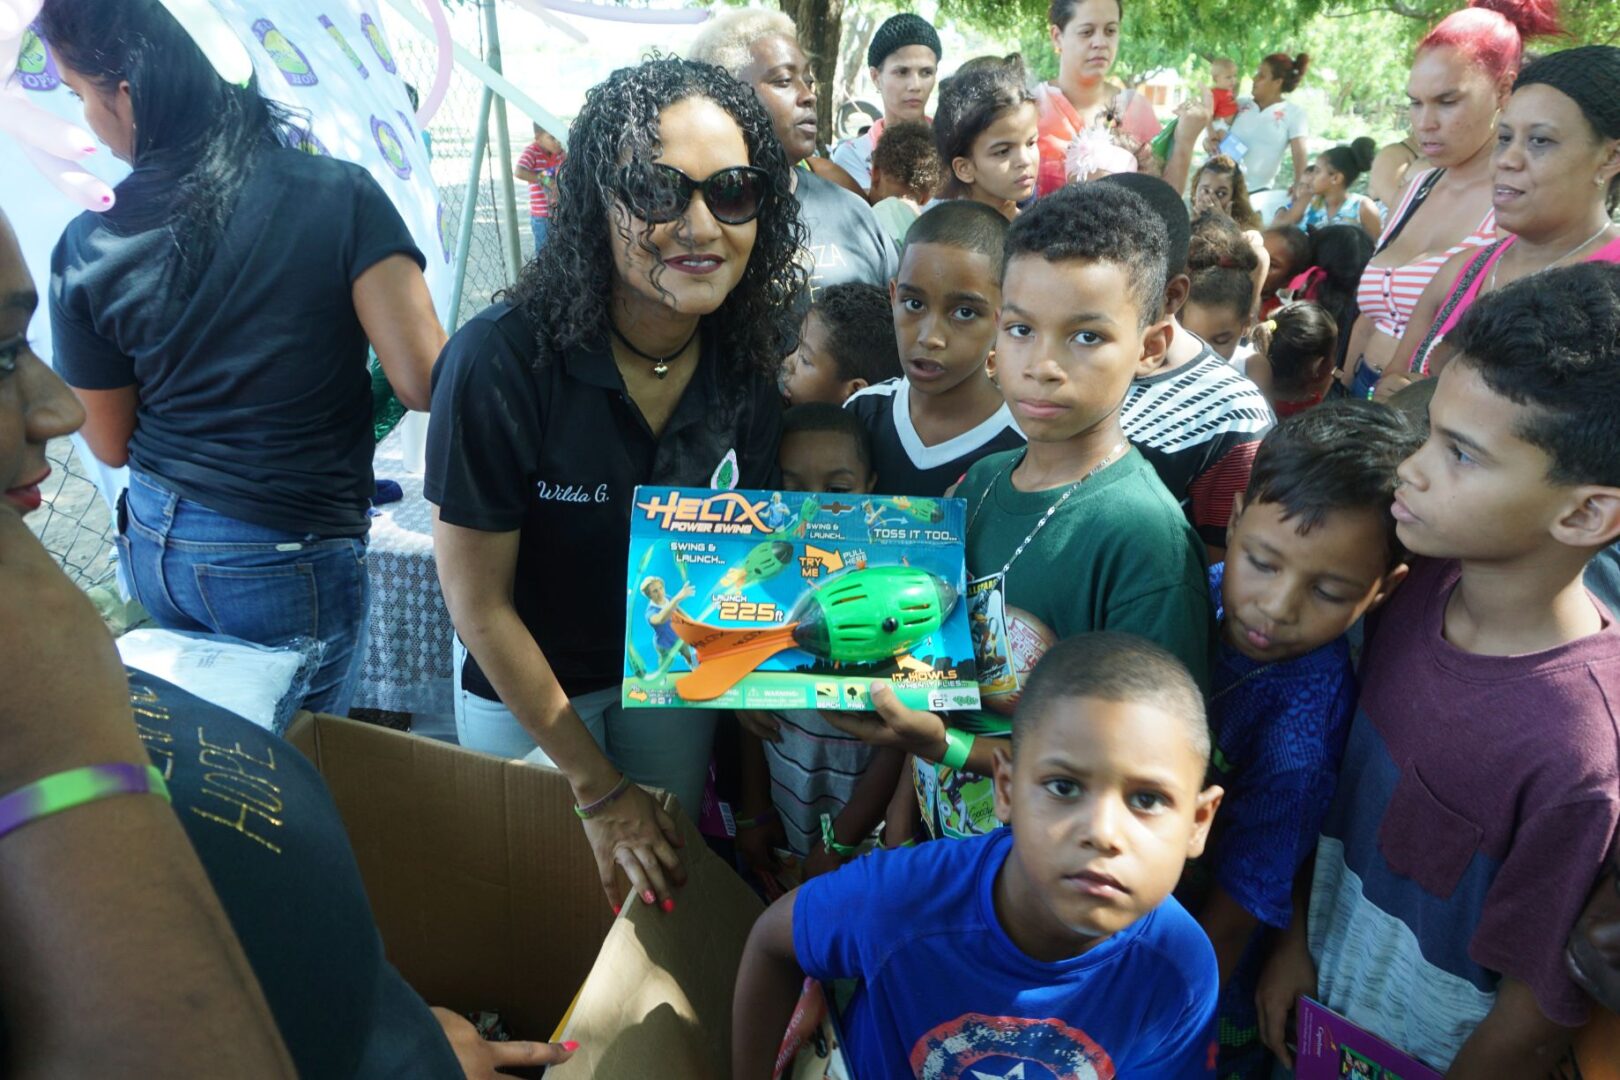 A female staff and a boy holding a box of a Helix toy, surrounded by a crowd